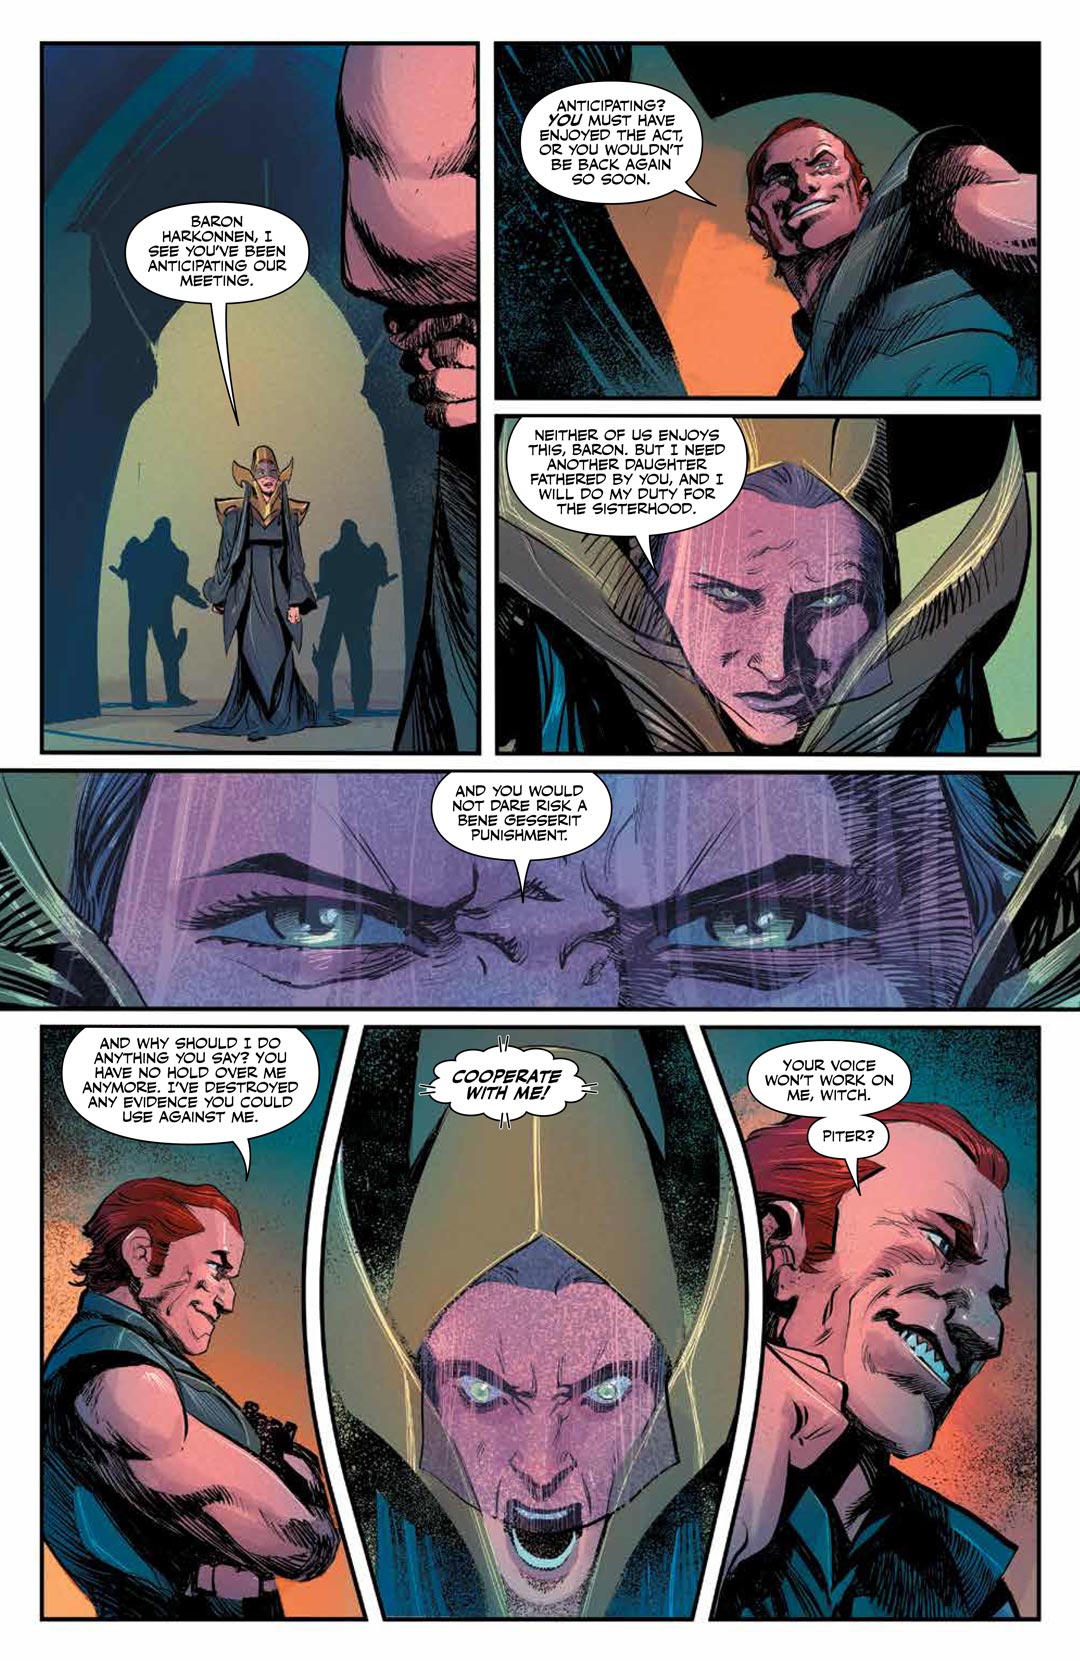 Dune: House Atreides comic series. Issue #7, preview page 6.